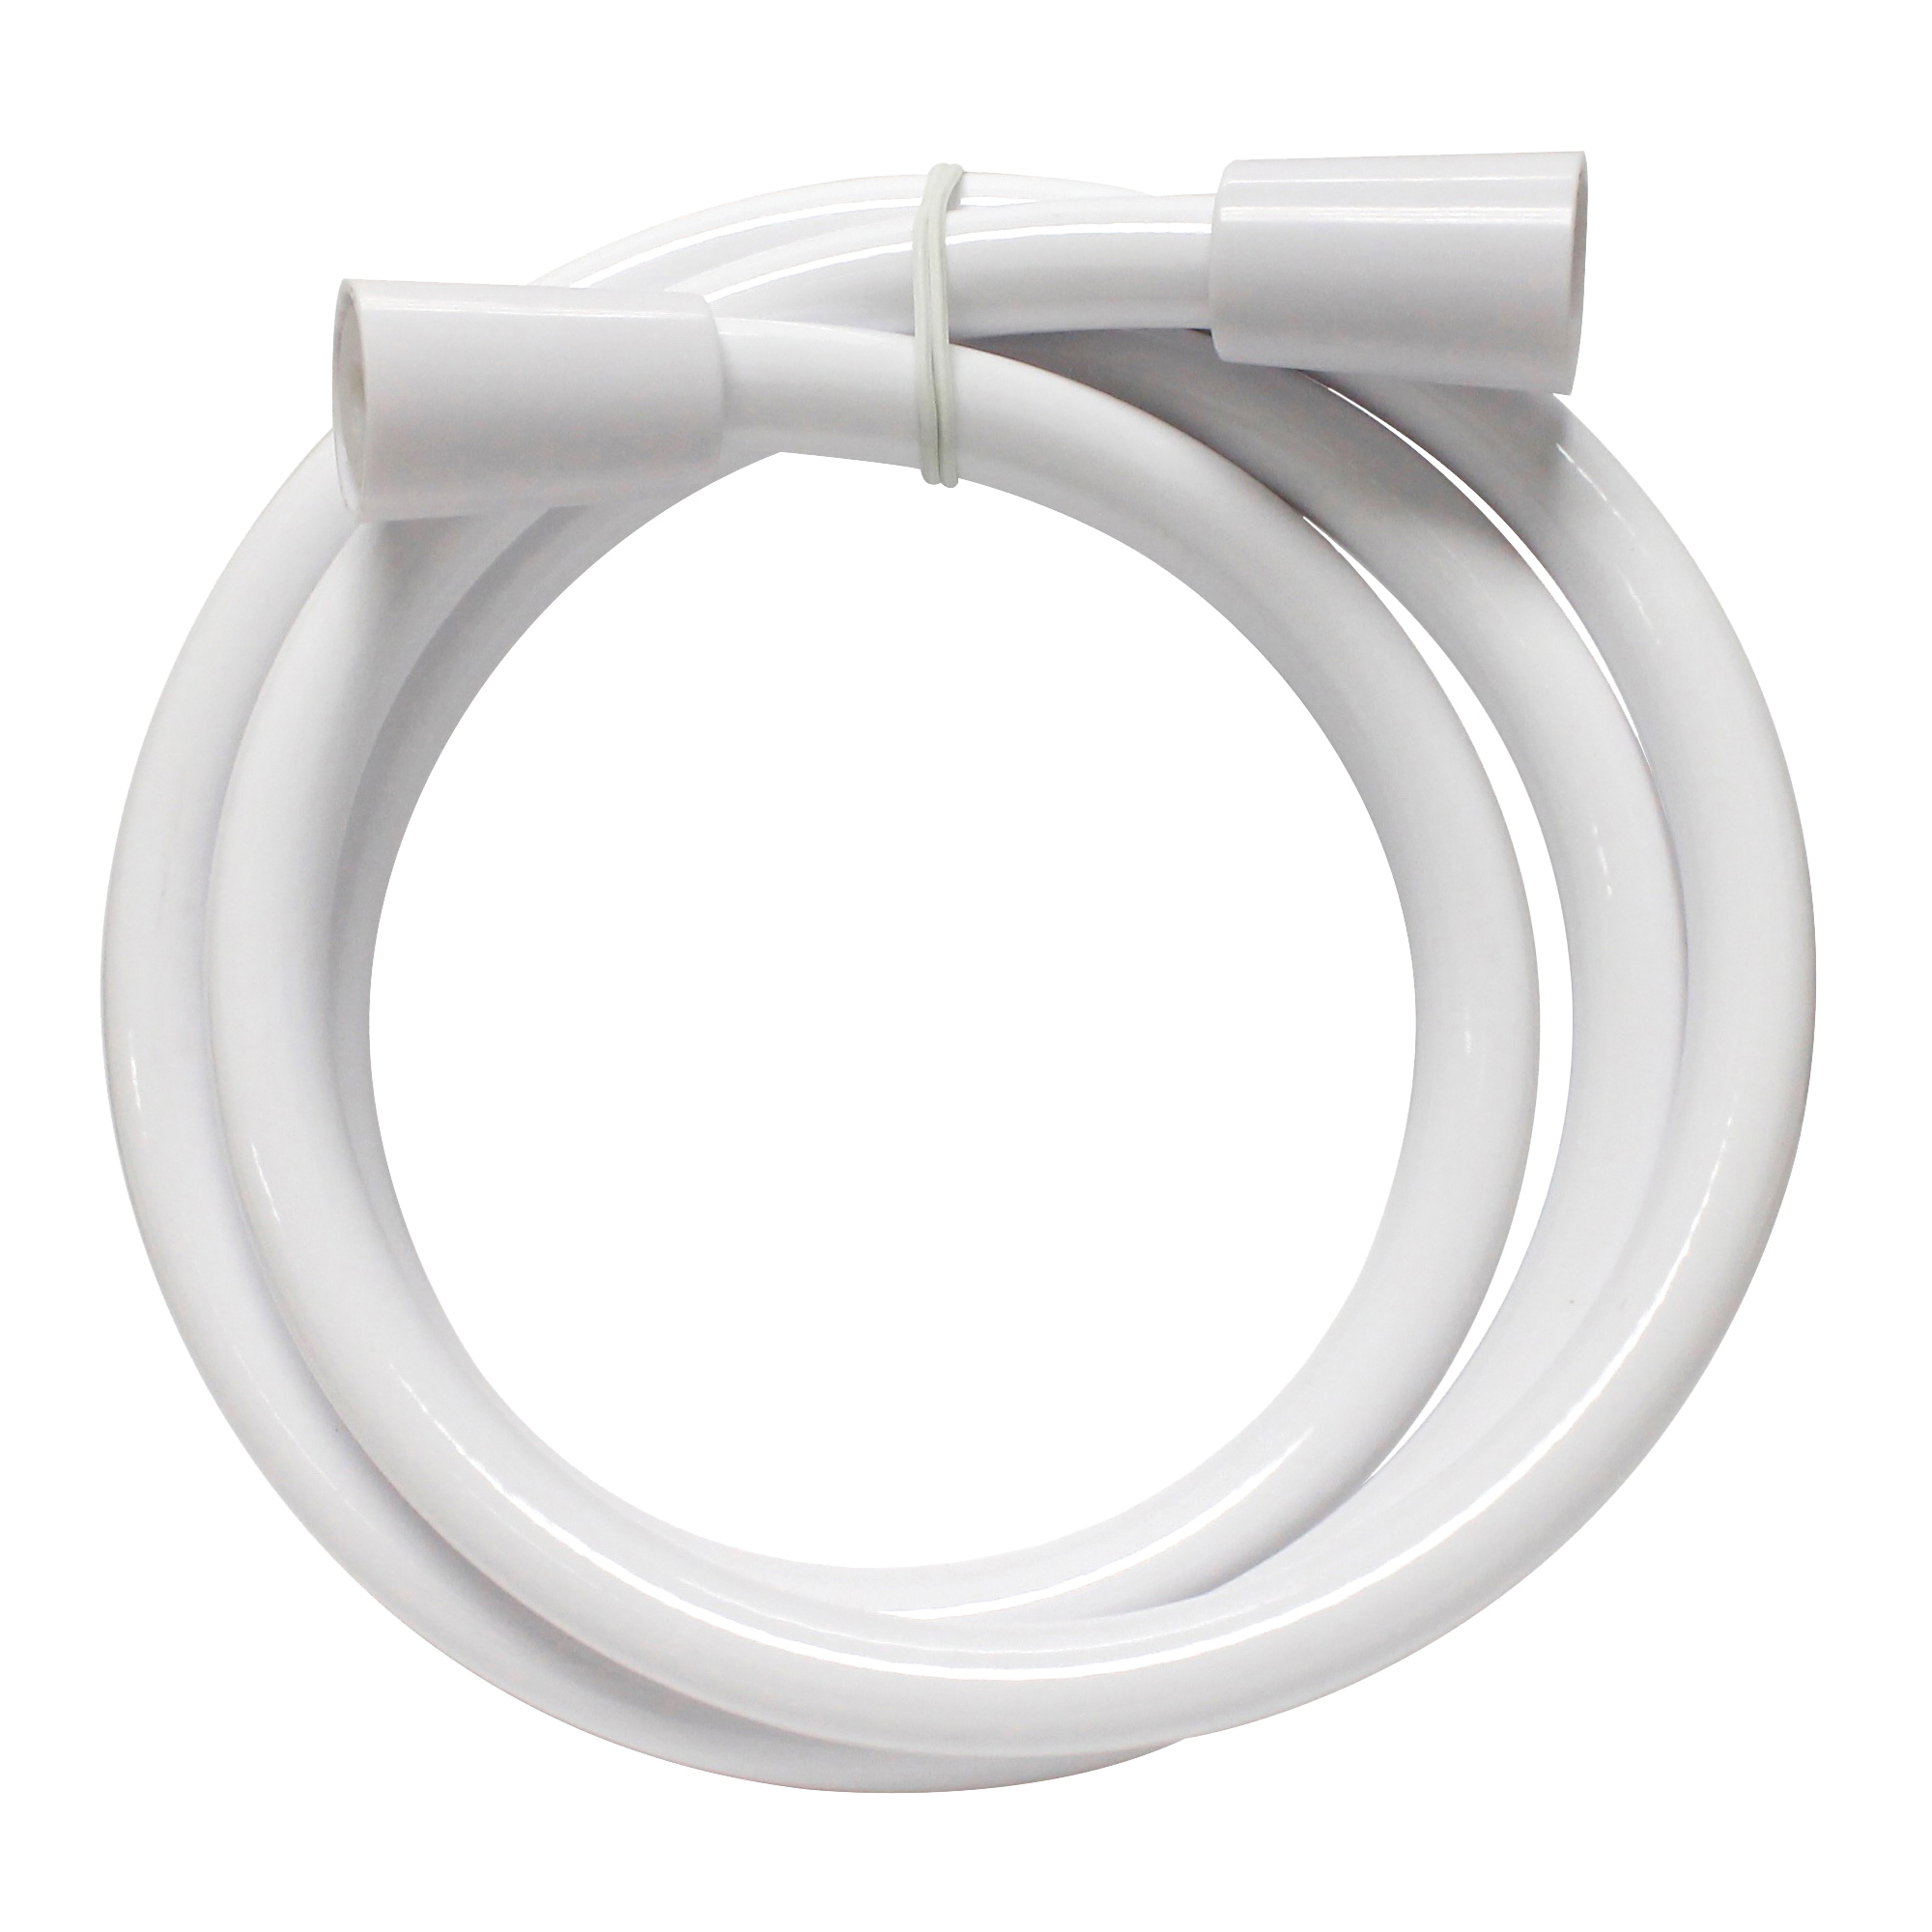 PP825-42 Replacement Shower Hose, 60 in L Hose, Vinyl, Chrome Plated